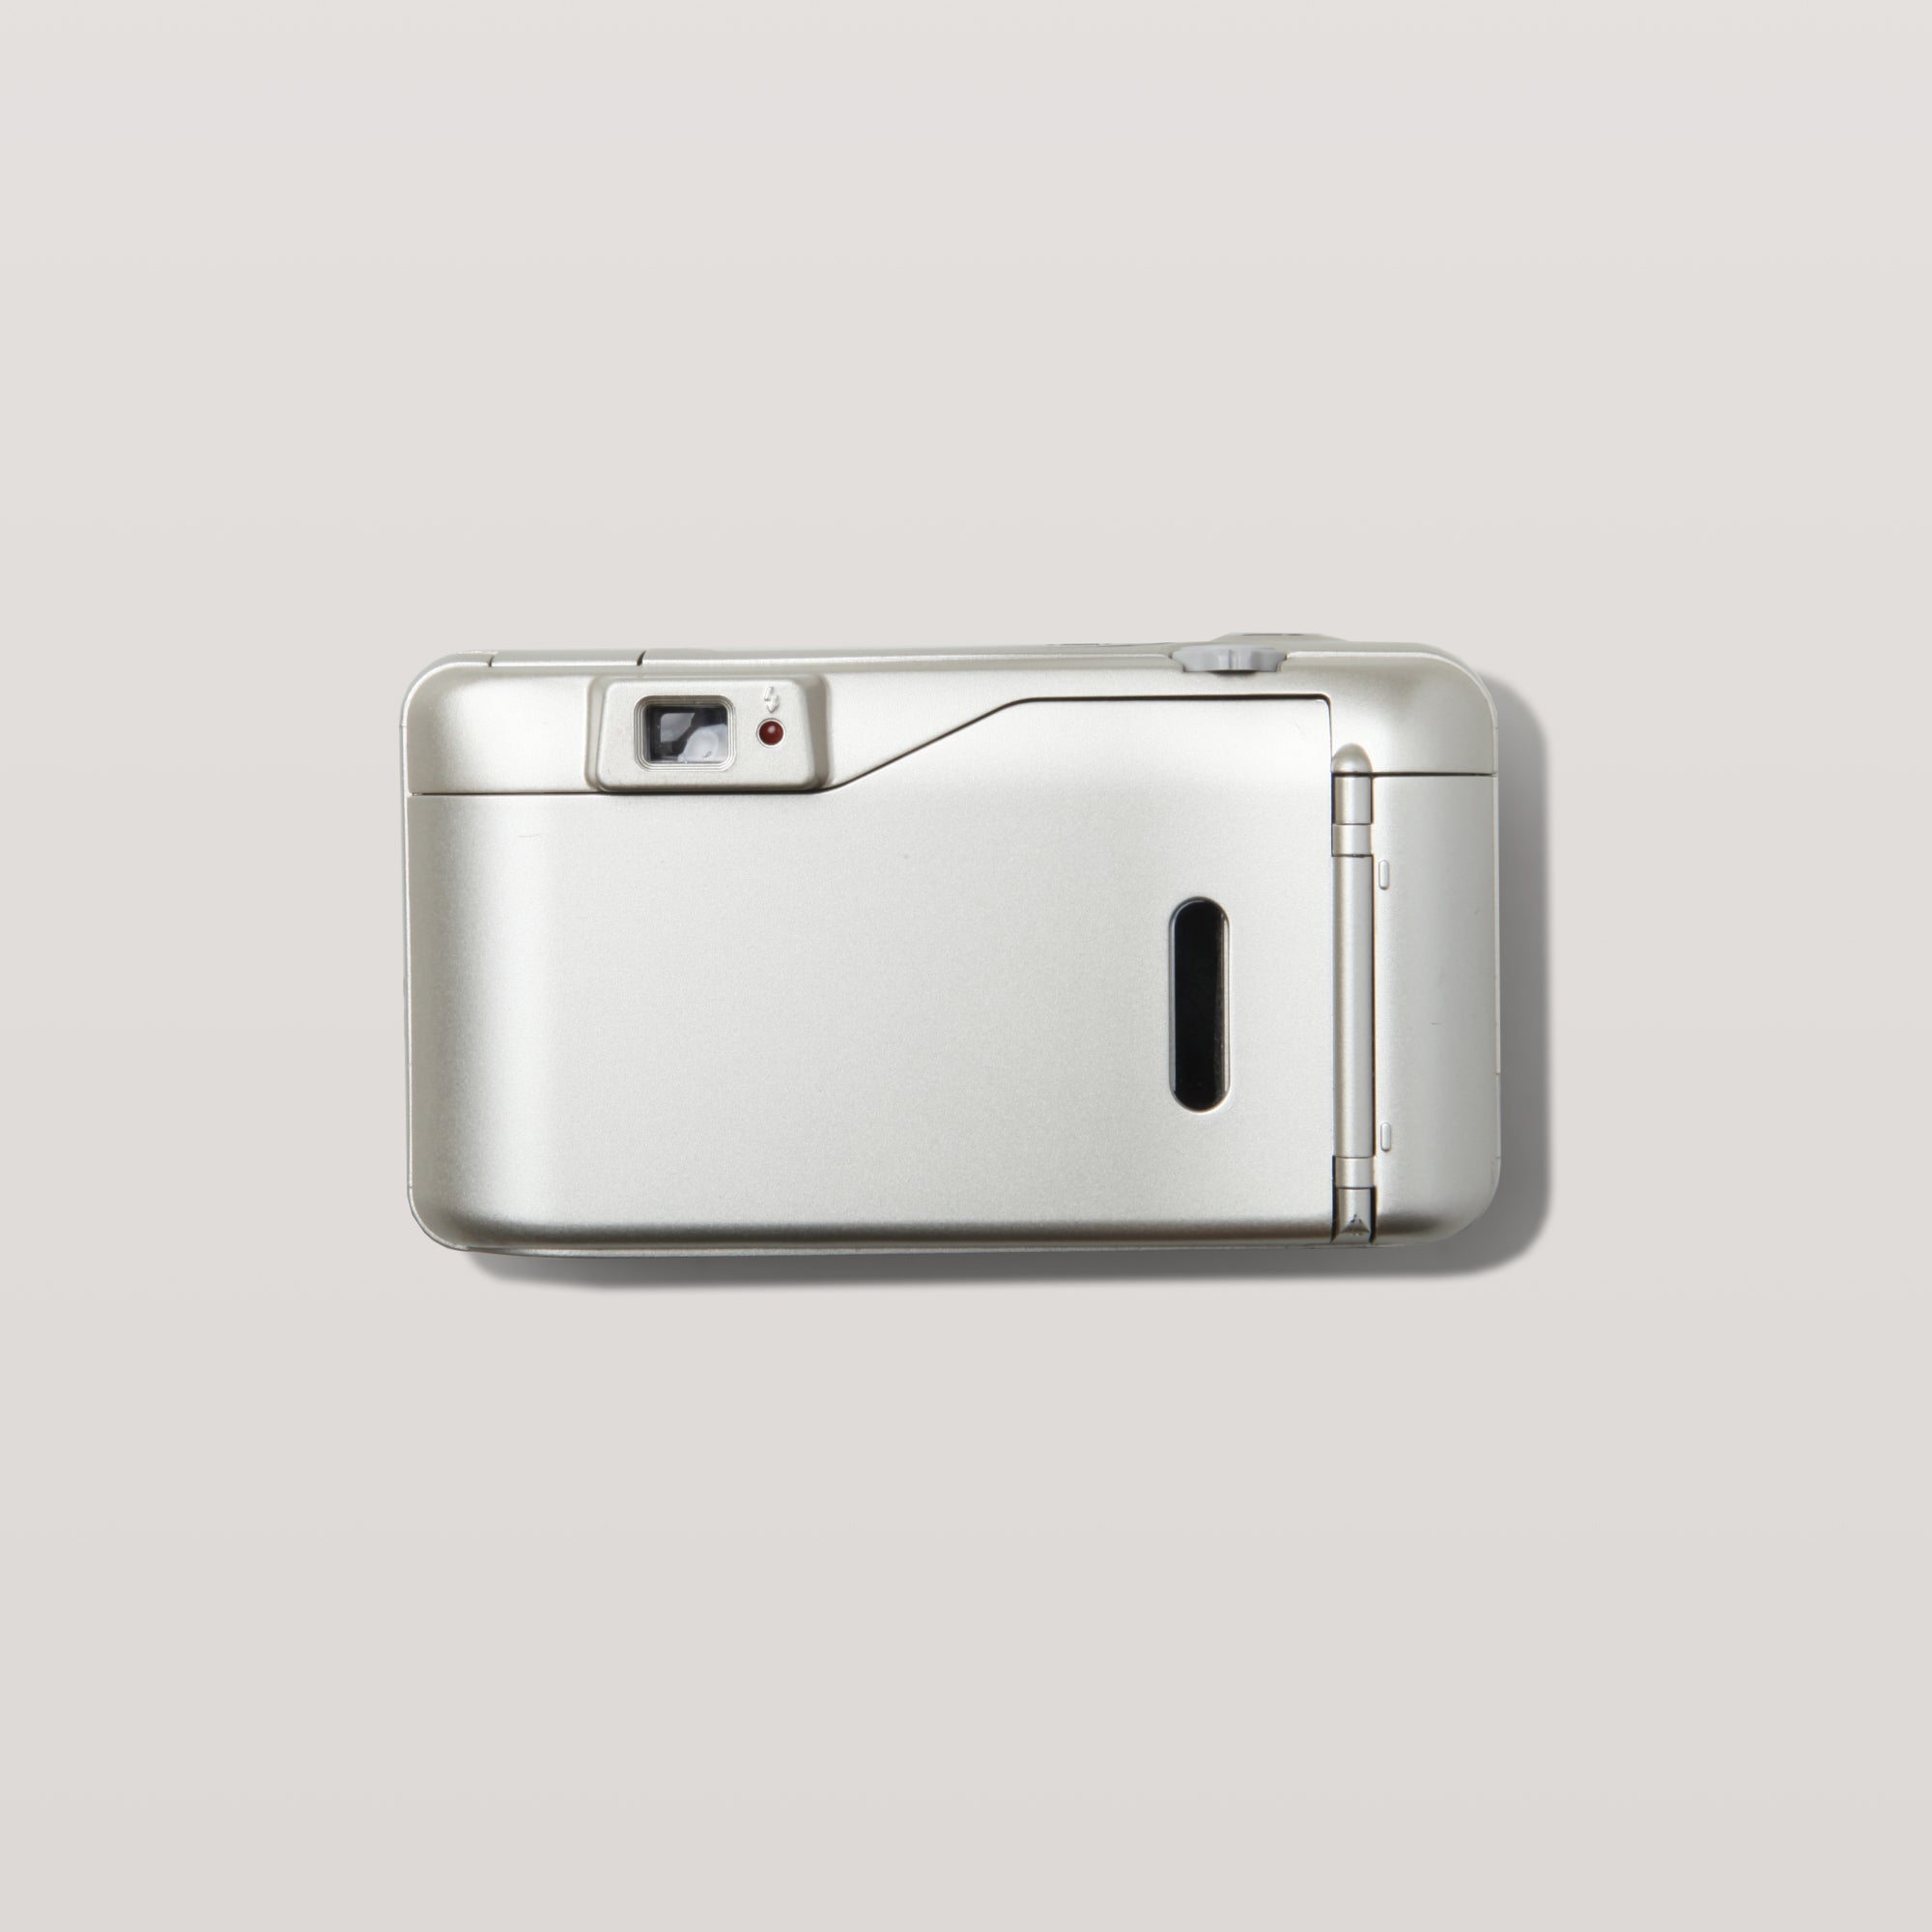 Buy Nikon Lite Touch Zoom 70W now at Analogue Amsterdam